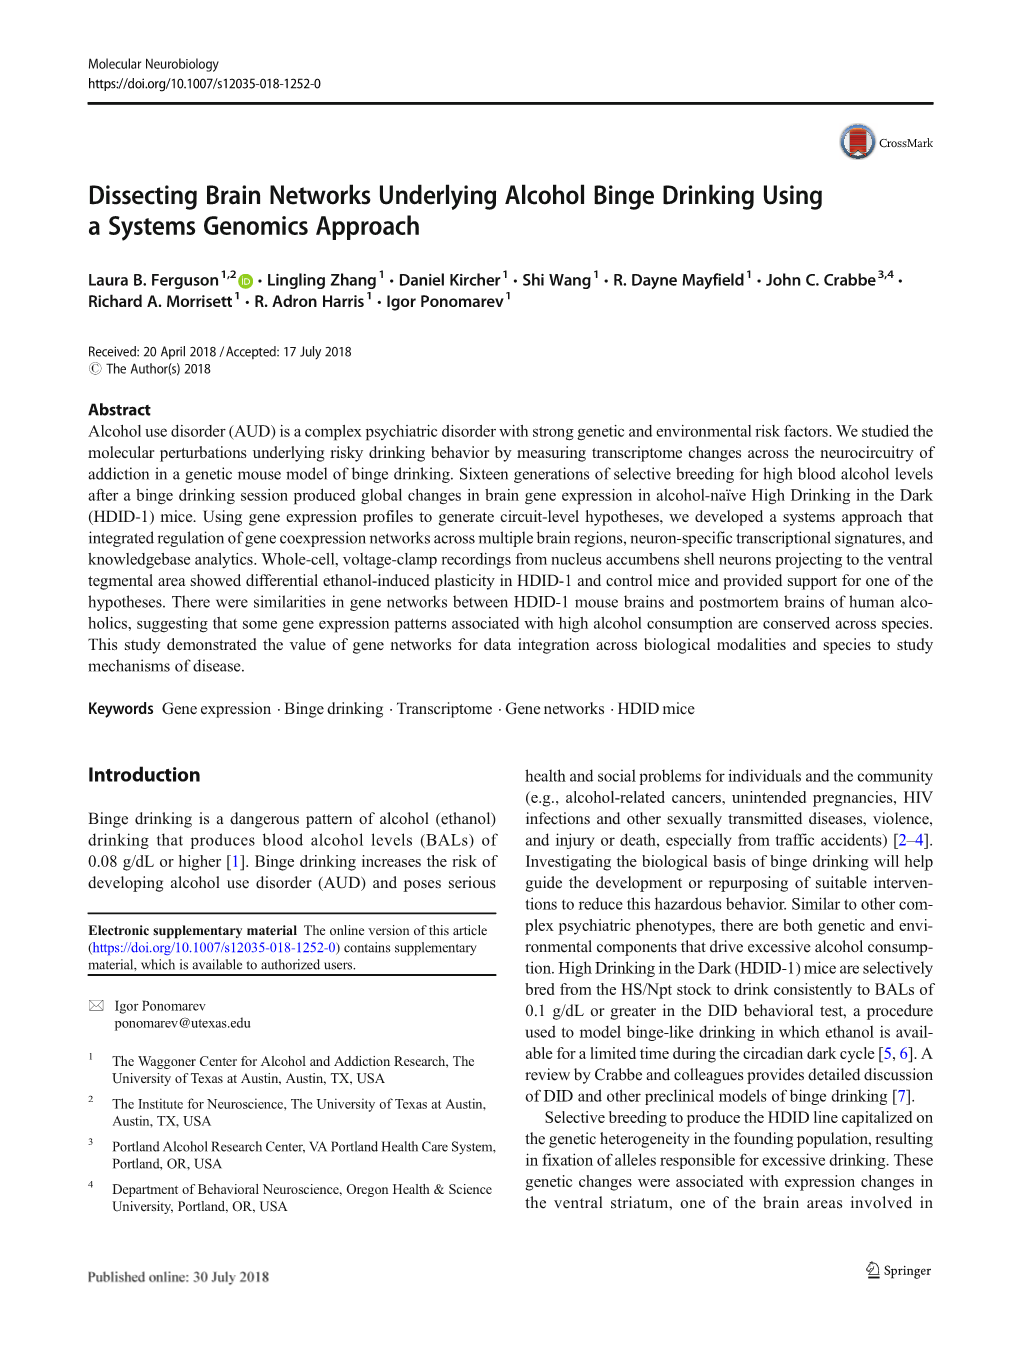 Dissecting Brain Networks Underlying Alcohol Binge Drinking Using a Systems Genomics Approach